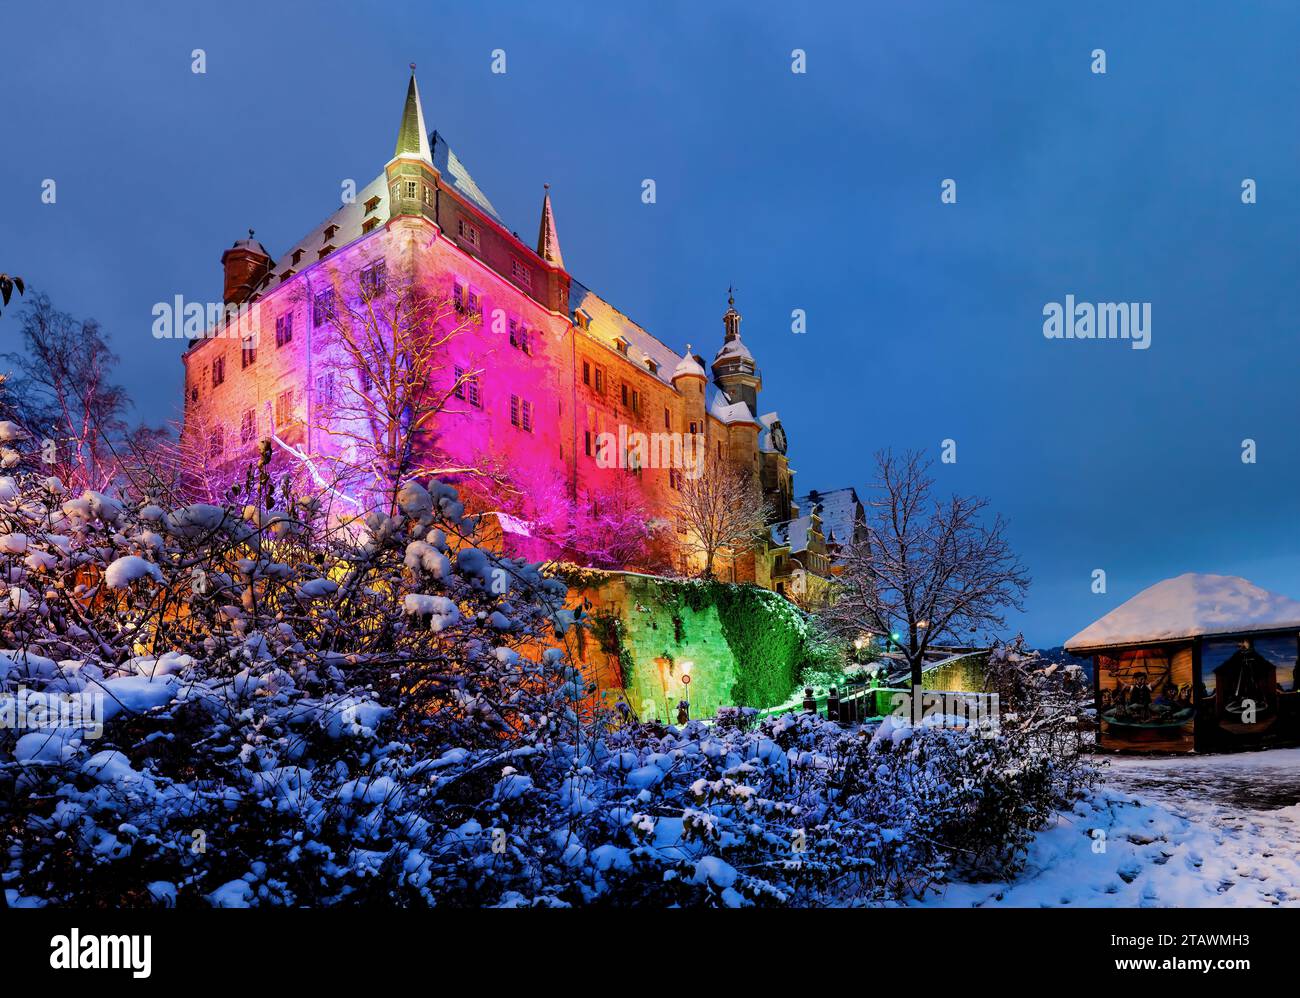 Castle of Marburg at Wintertime, Germany Stock Photo